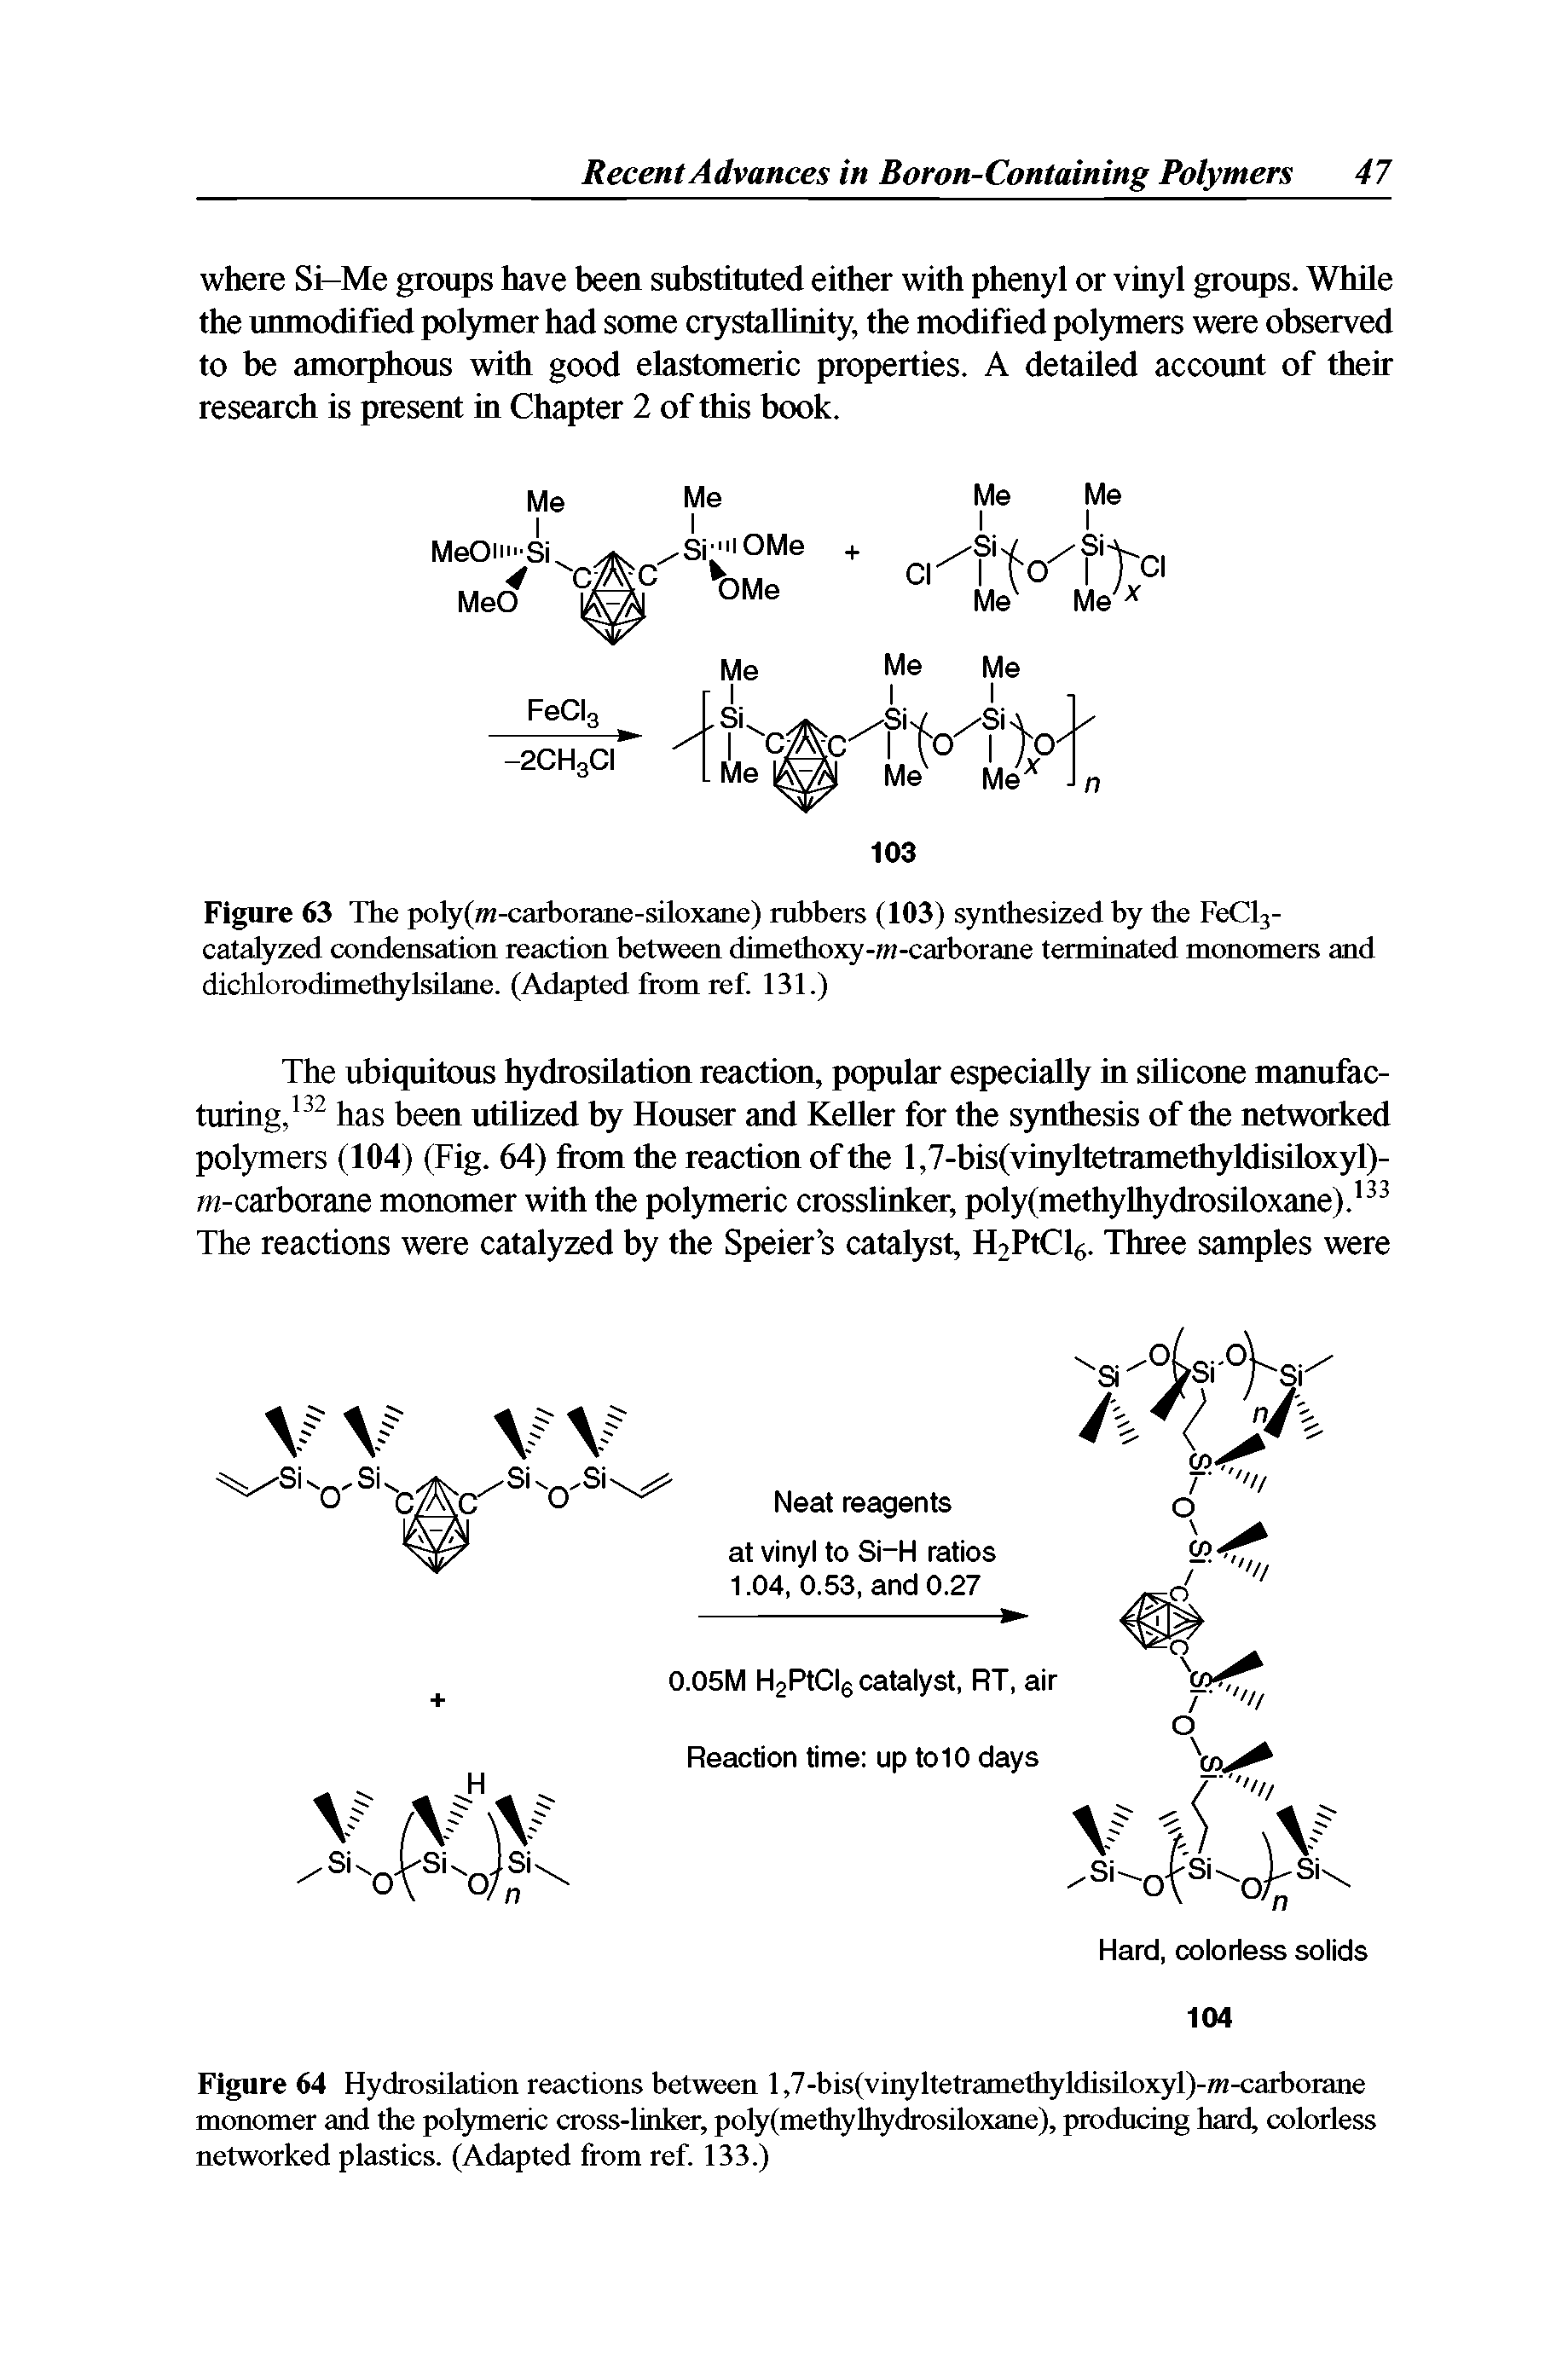 Figure 64 Hydrosilation reactions between l,7-bis(vinyltetramethyldisiloxyl)-m-carborane monomer and the polymeric cross-linker, poly(methylhydrosiloxane), producing hard, colorless networked plastics. (Adapted from ref. 133.)...